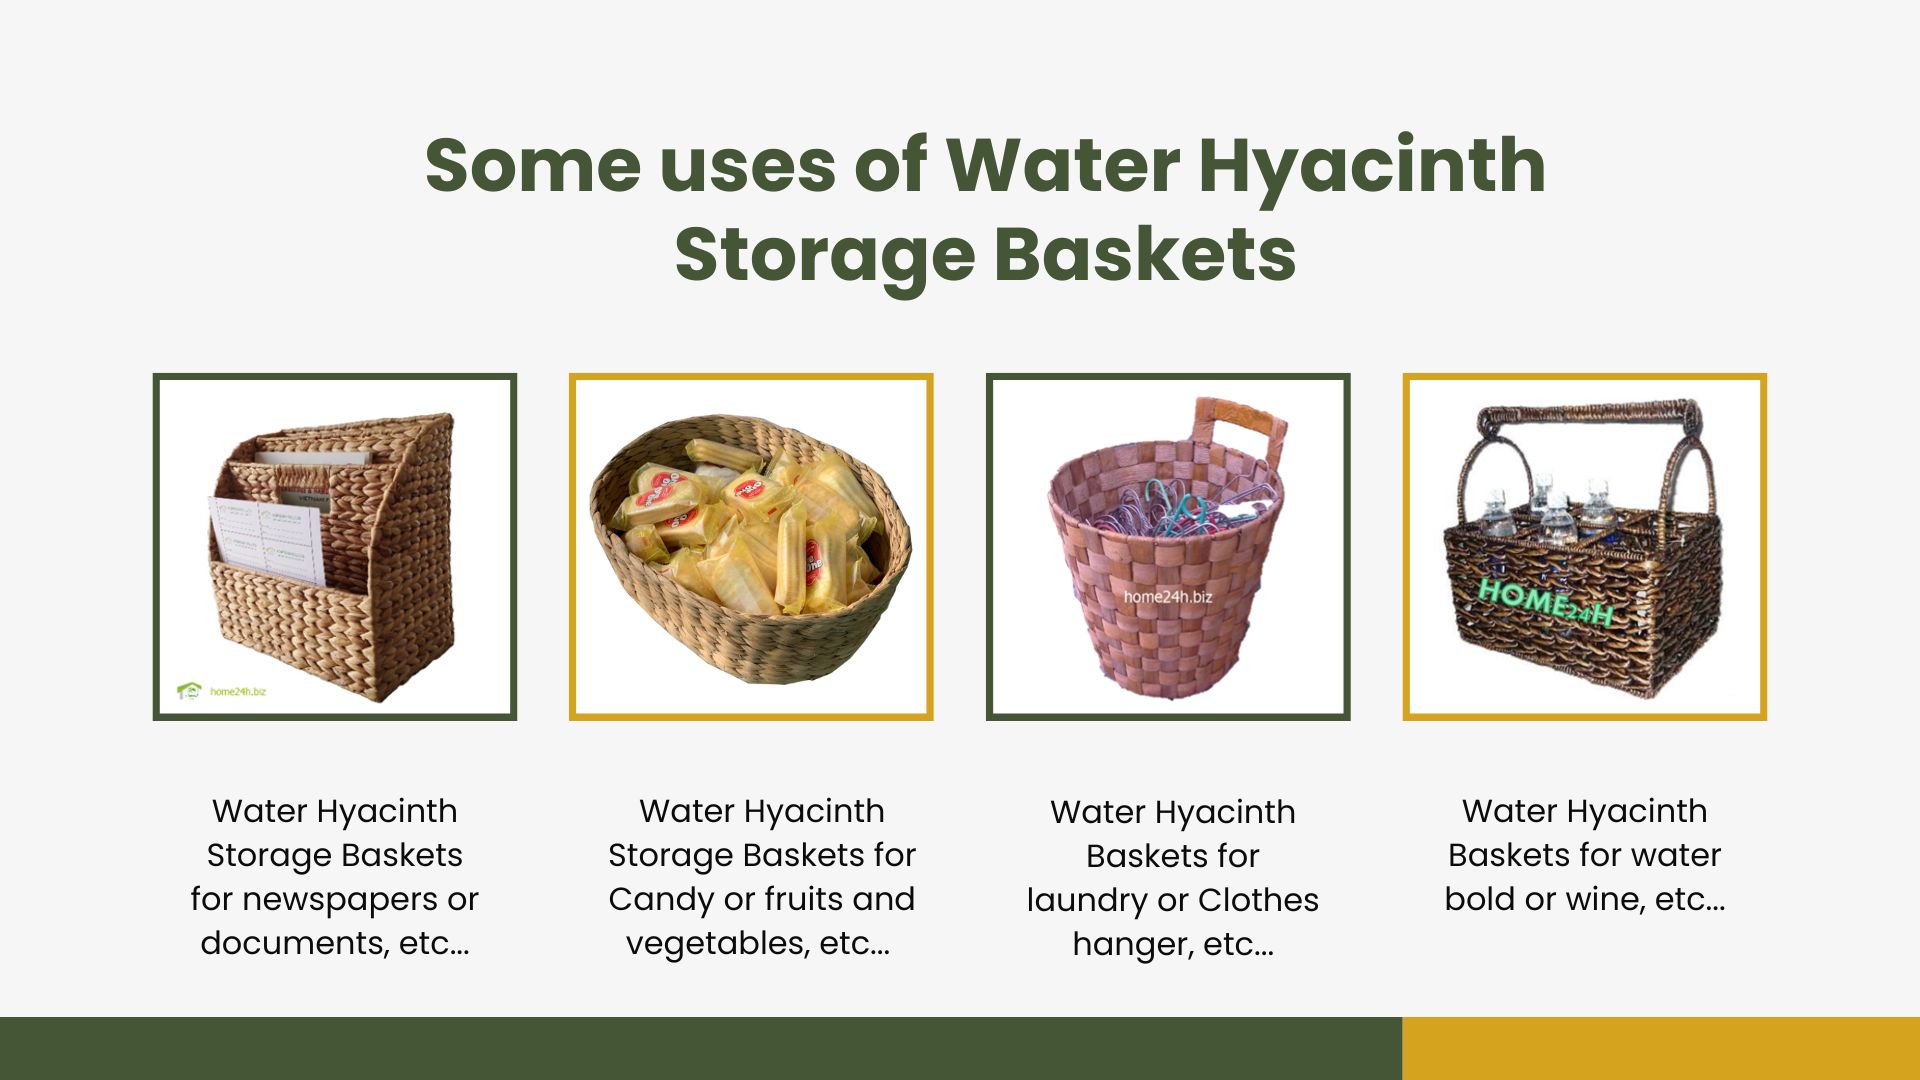 Somes uses of Water Hyacinth Storage Baskets